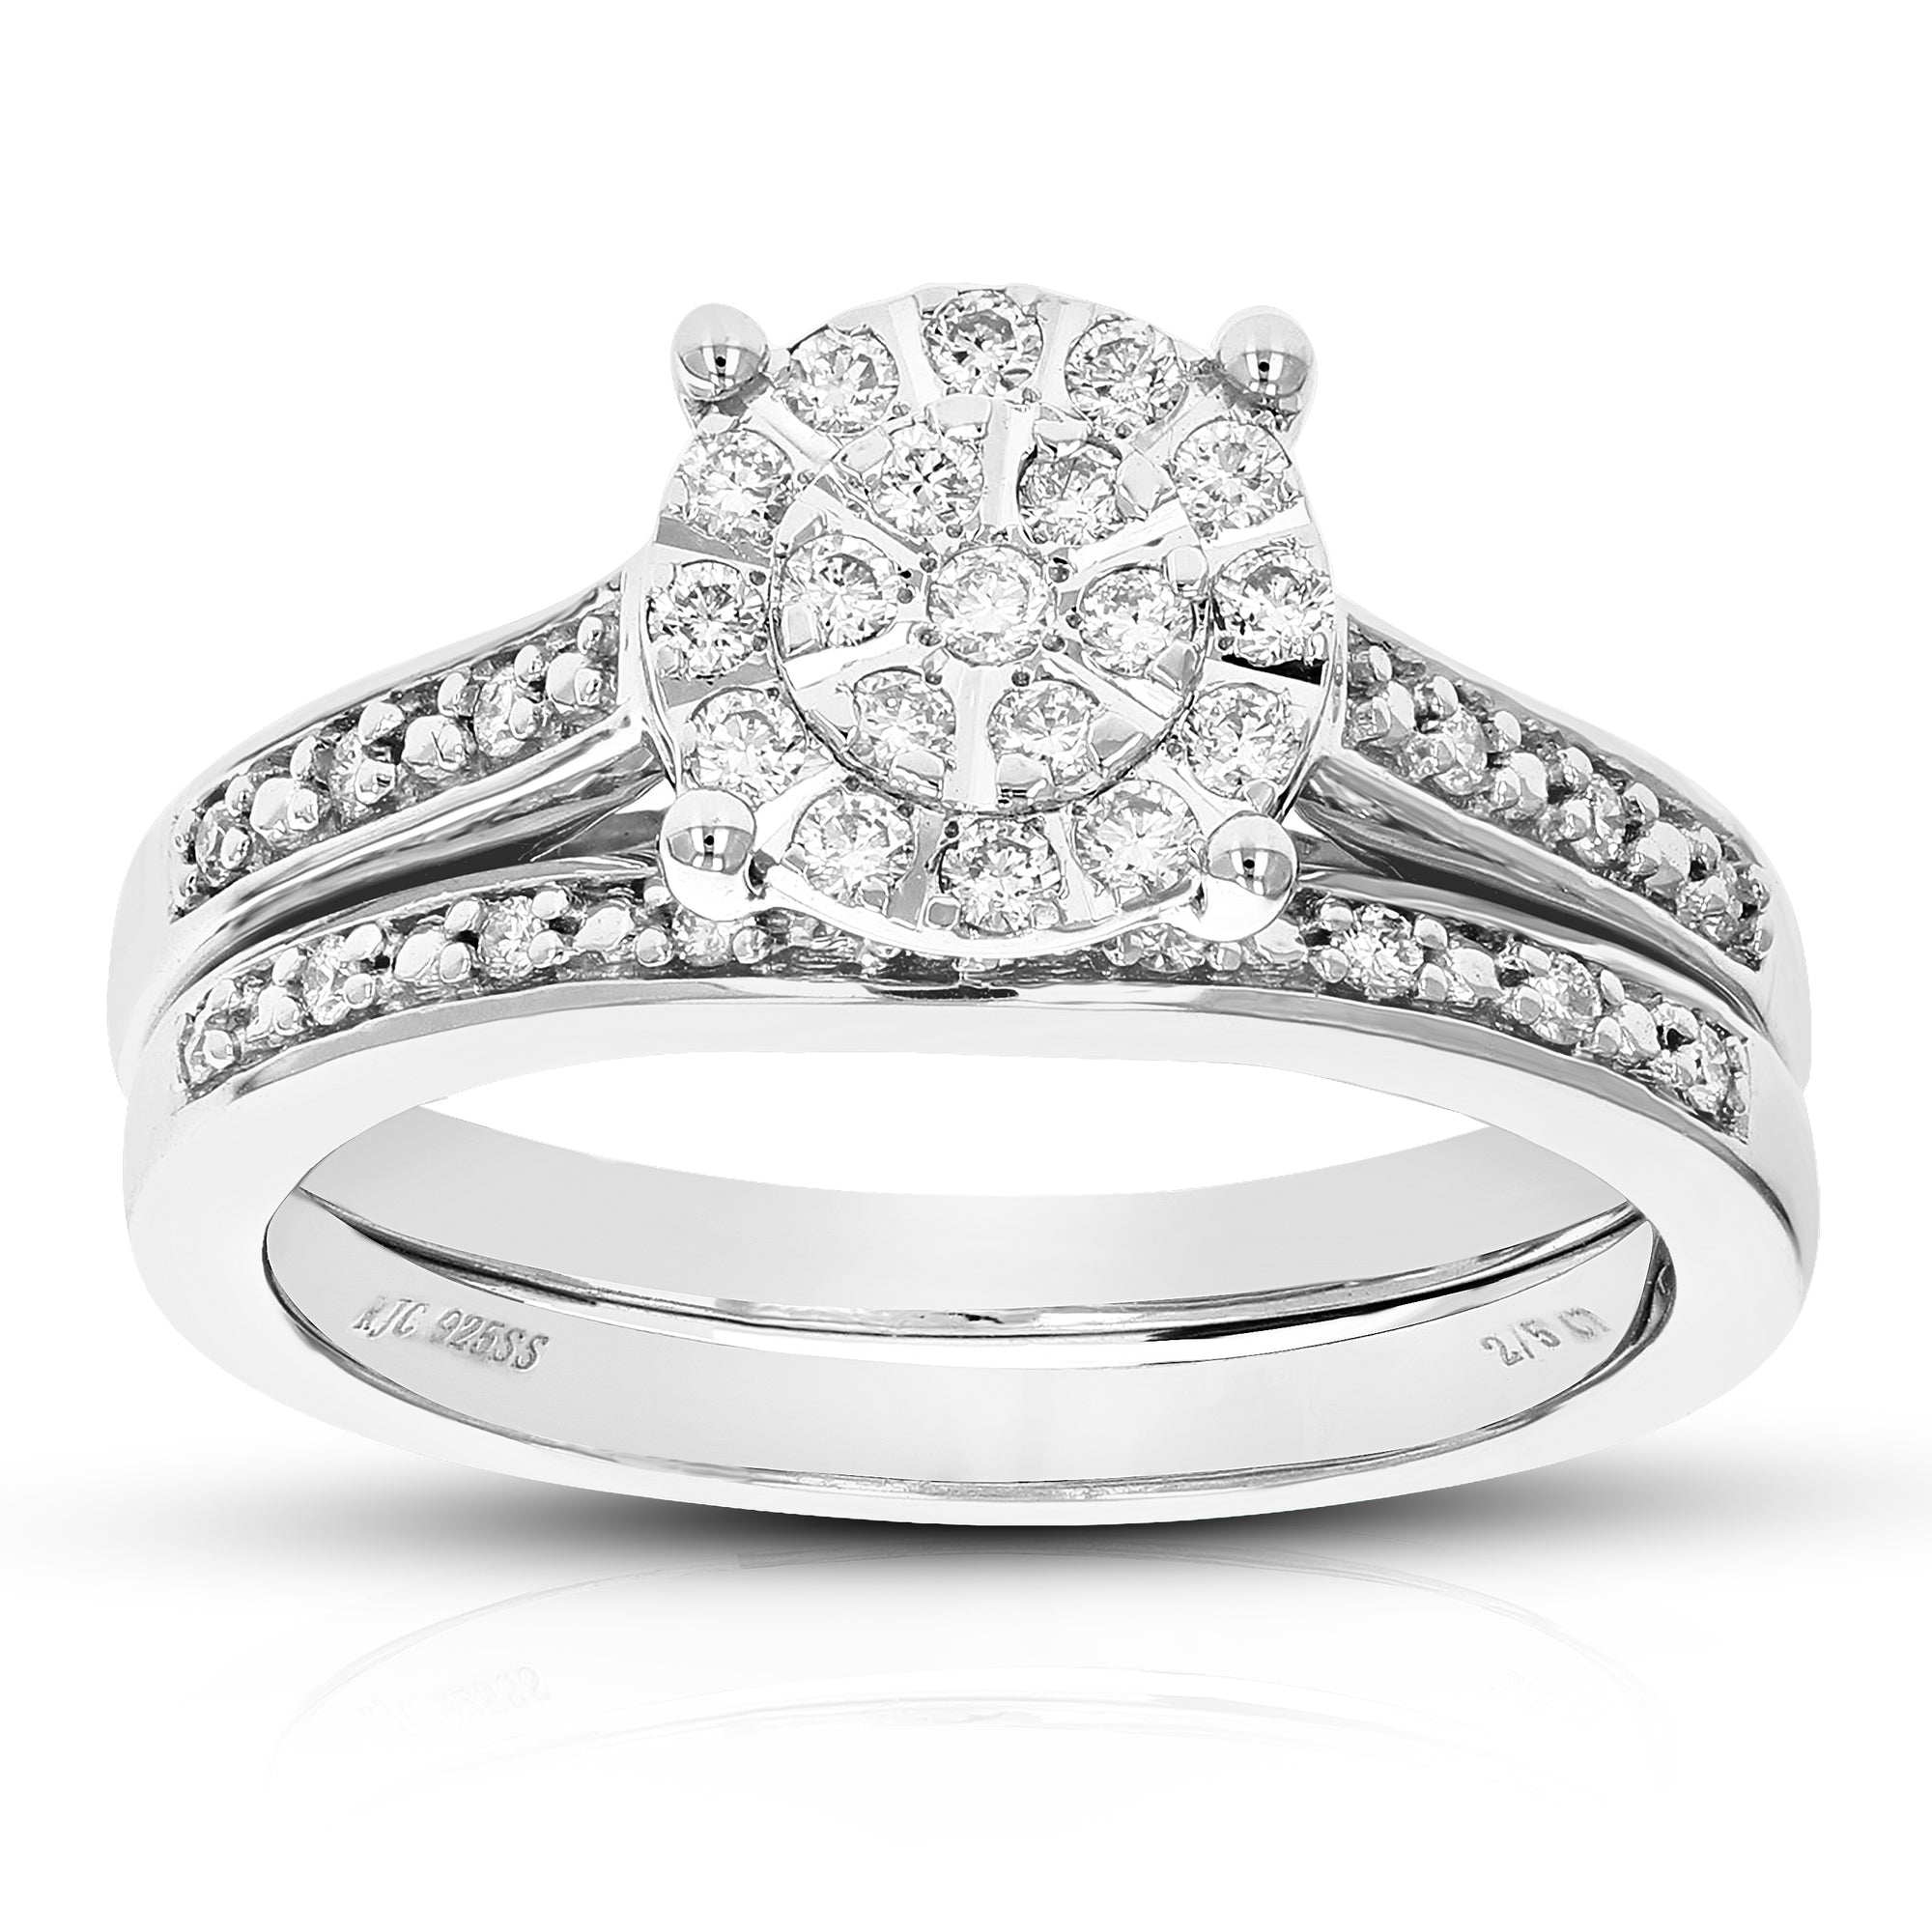 2/5 cttw Wedding Engagement Ring Bridal Set, Round Lab Grown Diamond Ring for Women in .925 Sterling Silver, Prong Setting, Size 6-8